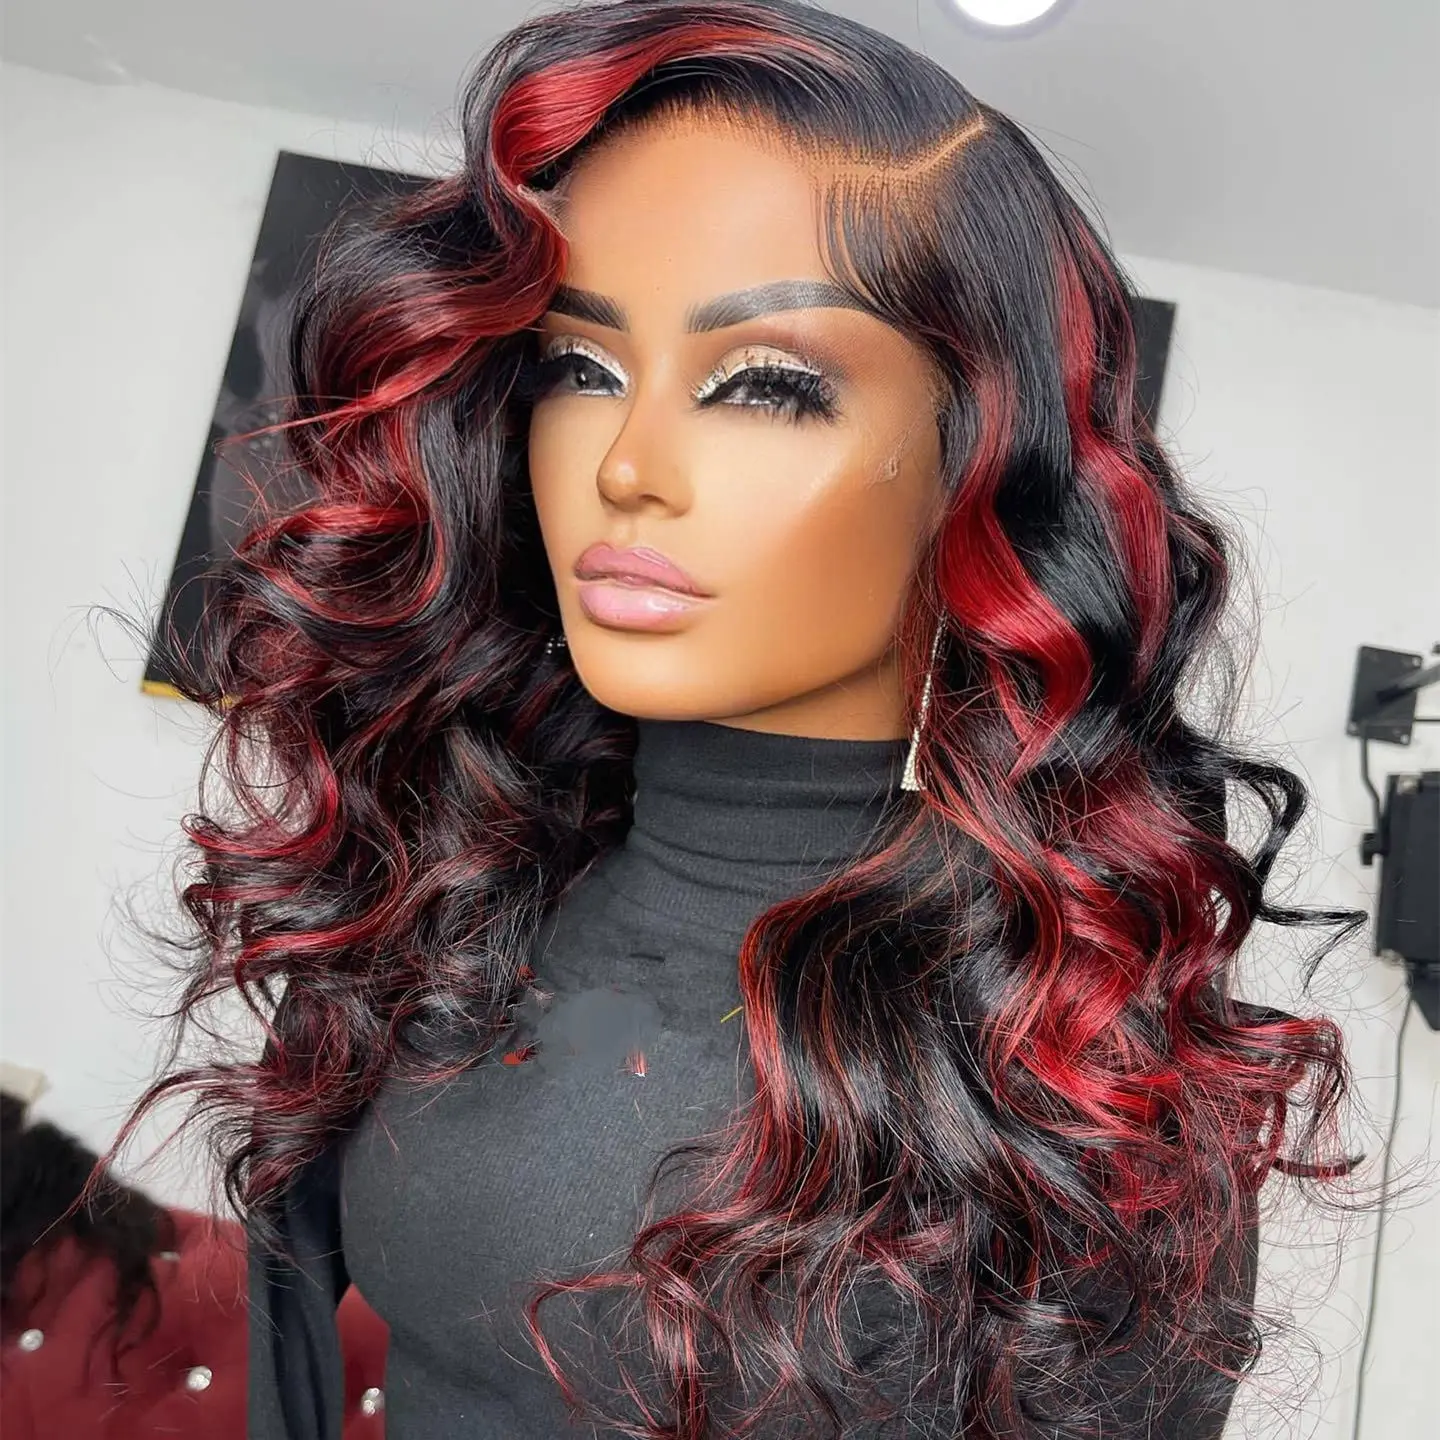 Red Highlight Wig Body Wave Lace Front Wigs Synthetic Ombre Red With Black Colored Glueless High Temperature With Baby Hair test meters high torque electricpen colored highlight tester pen magnetic bit screwdriver electric pencil 3pc lr41 button batter